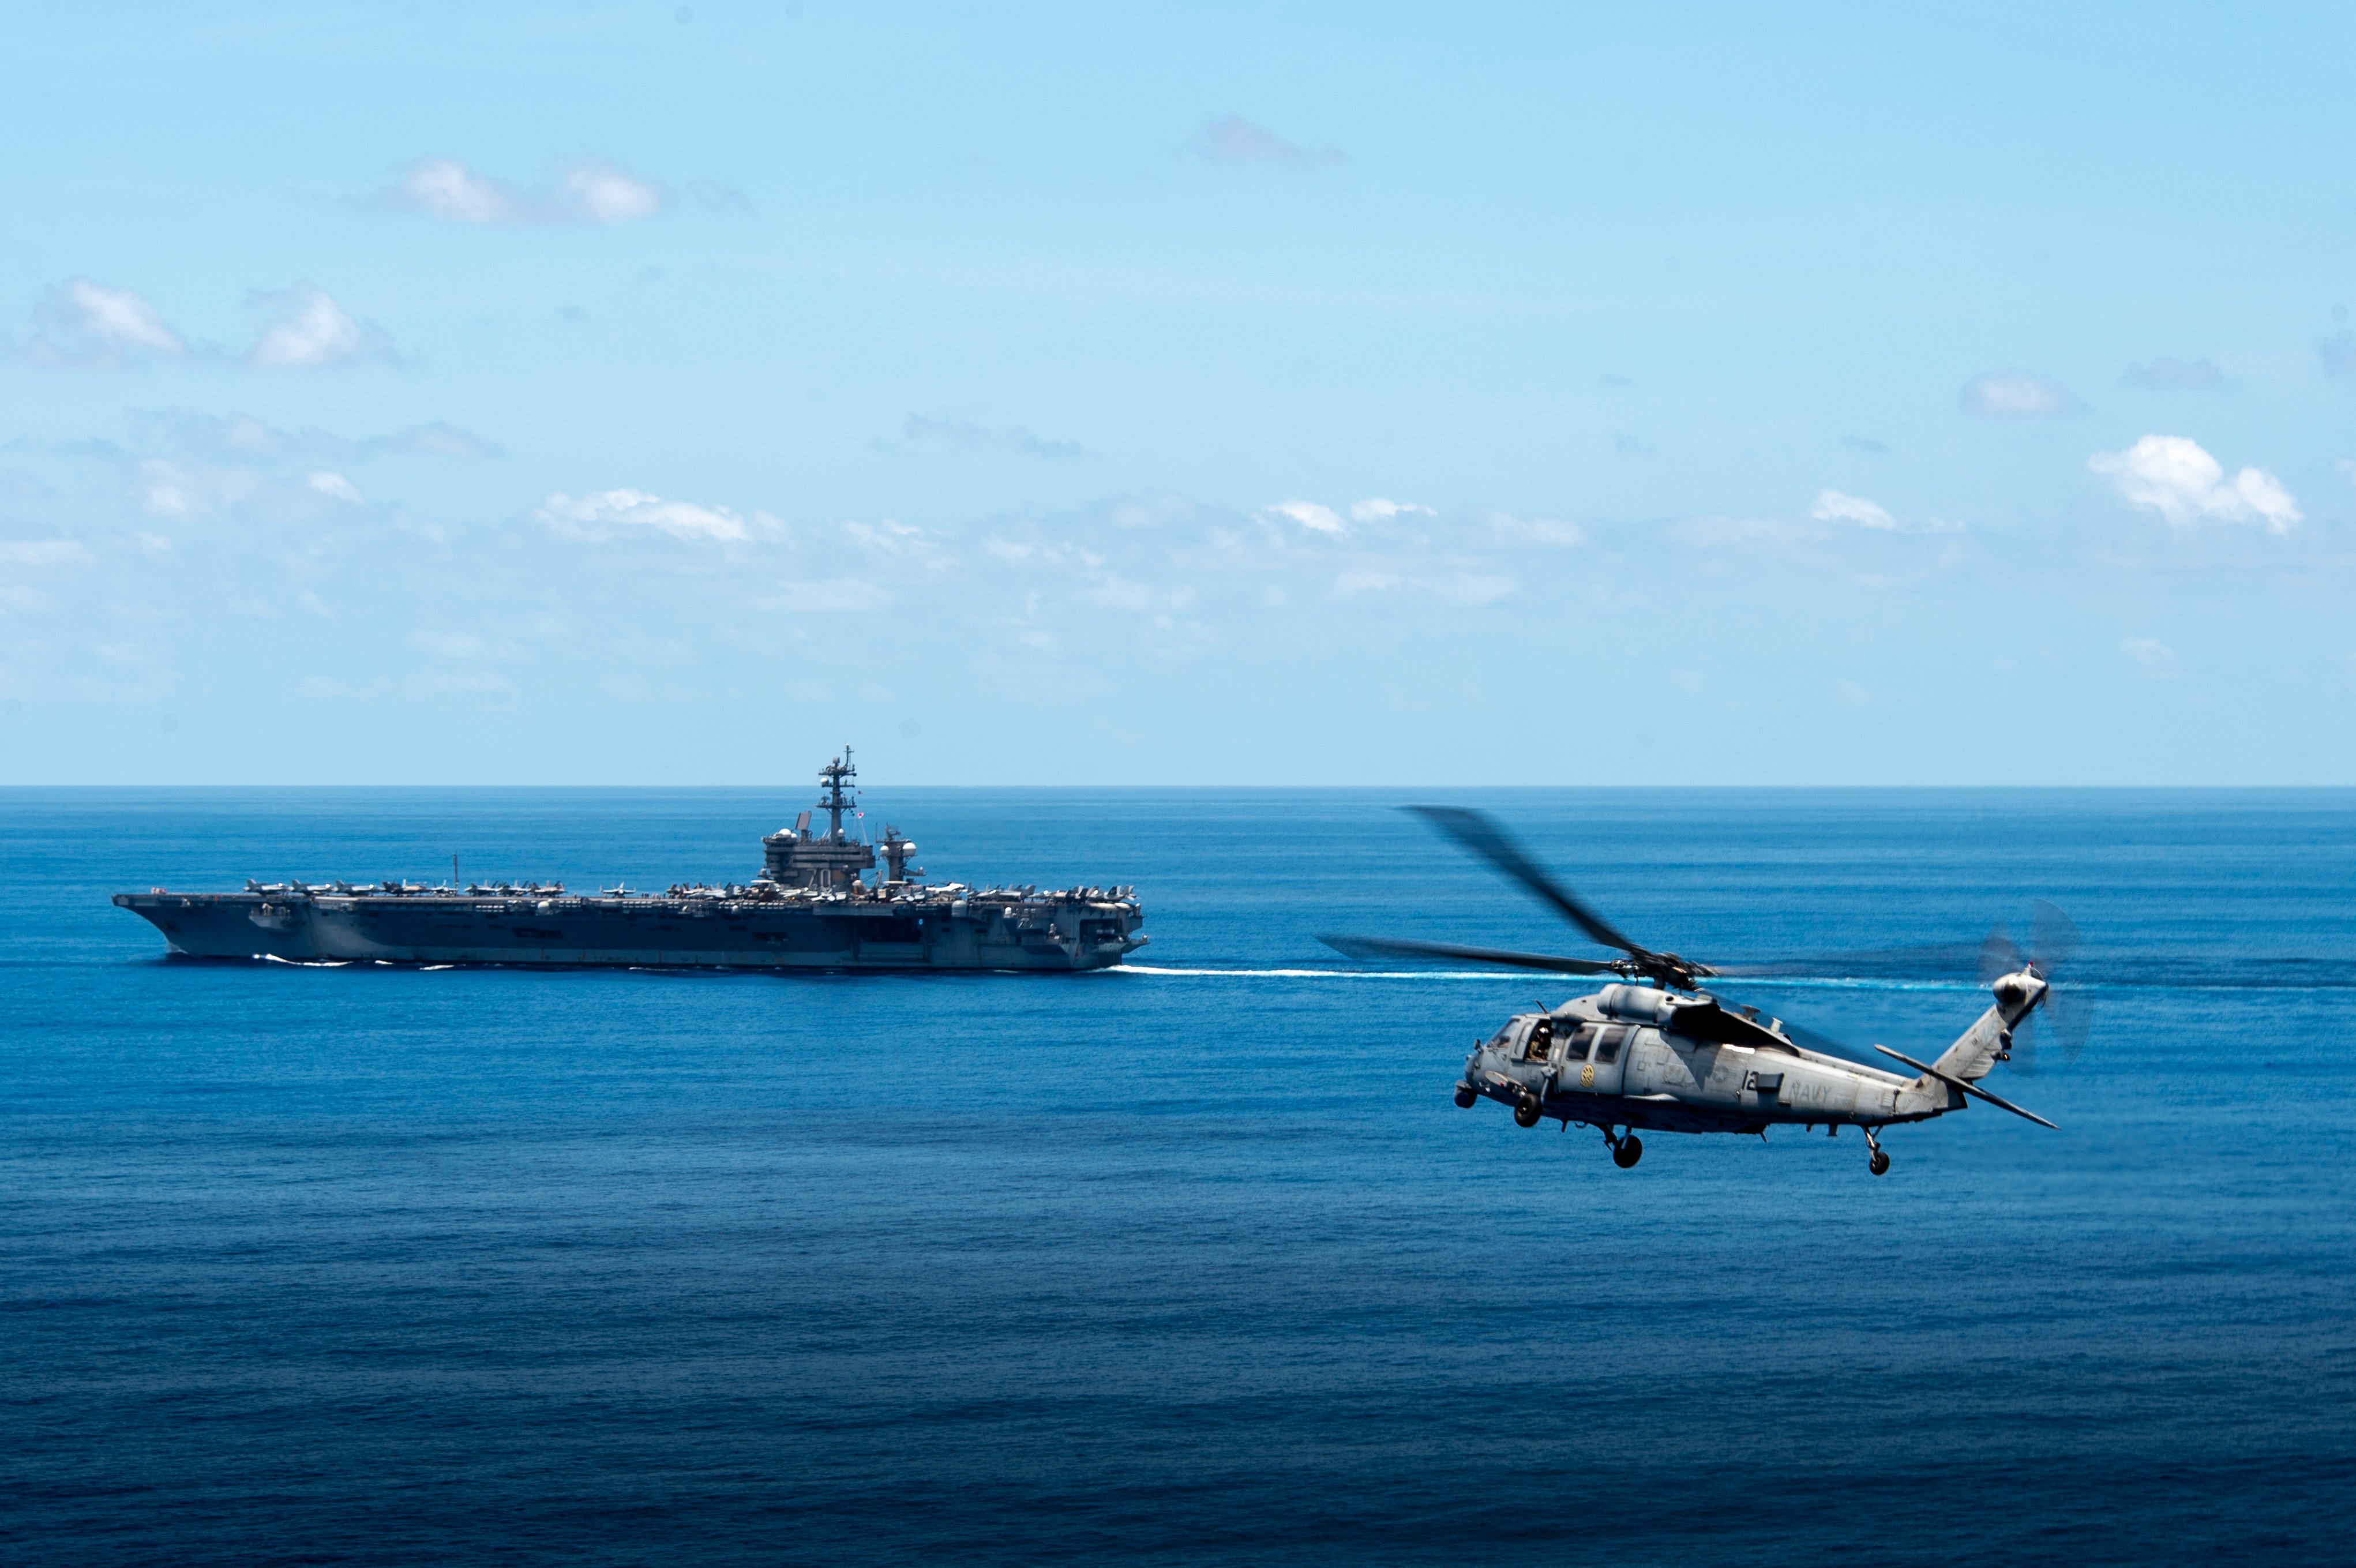 USS Carl Vinson (CVN 70) while transiting the Indian Ocean during a bilateral training exercise with the Royal Australian Air Force, Dec. 17, 2021.jpg